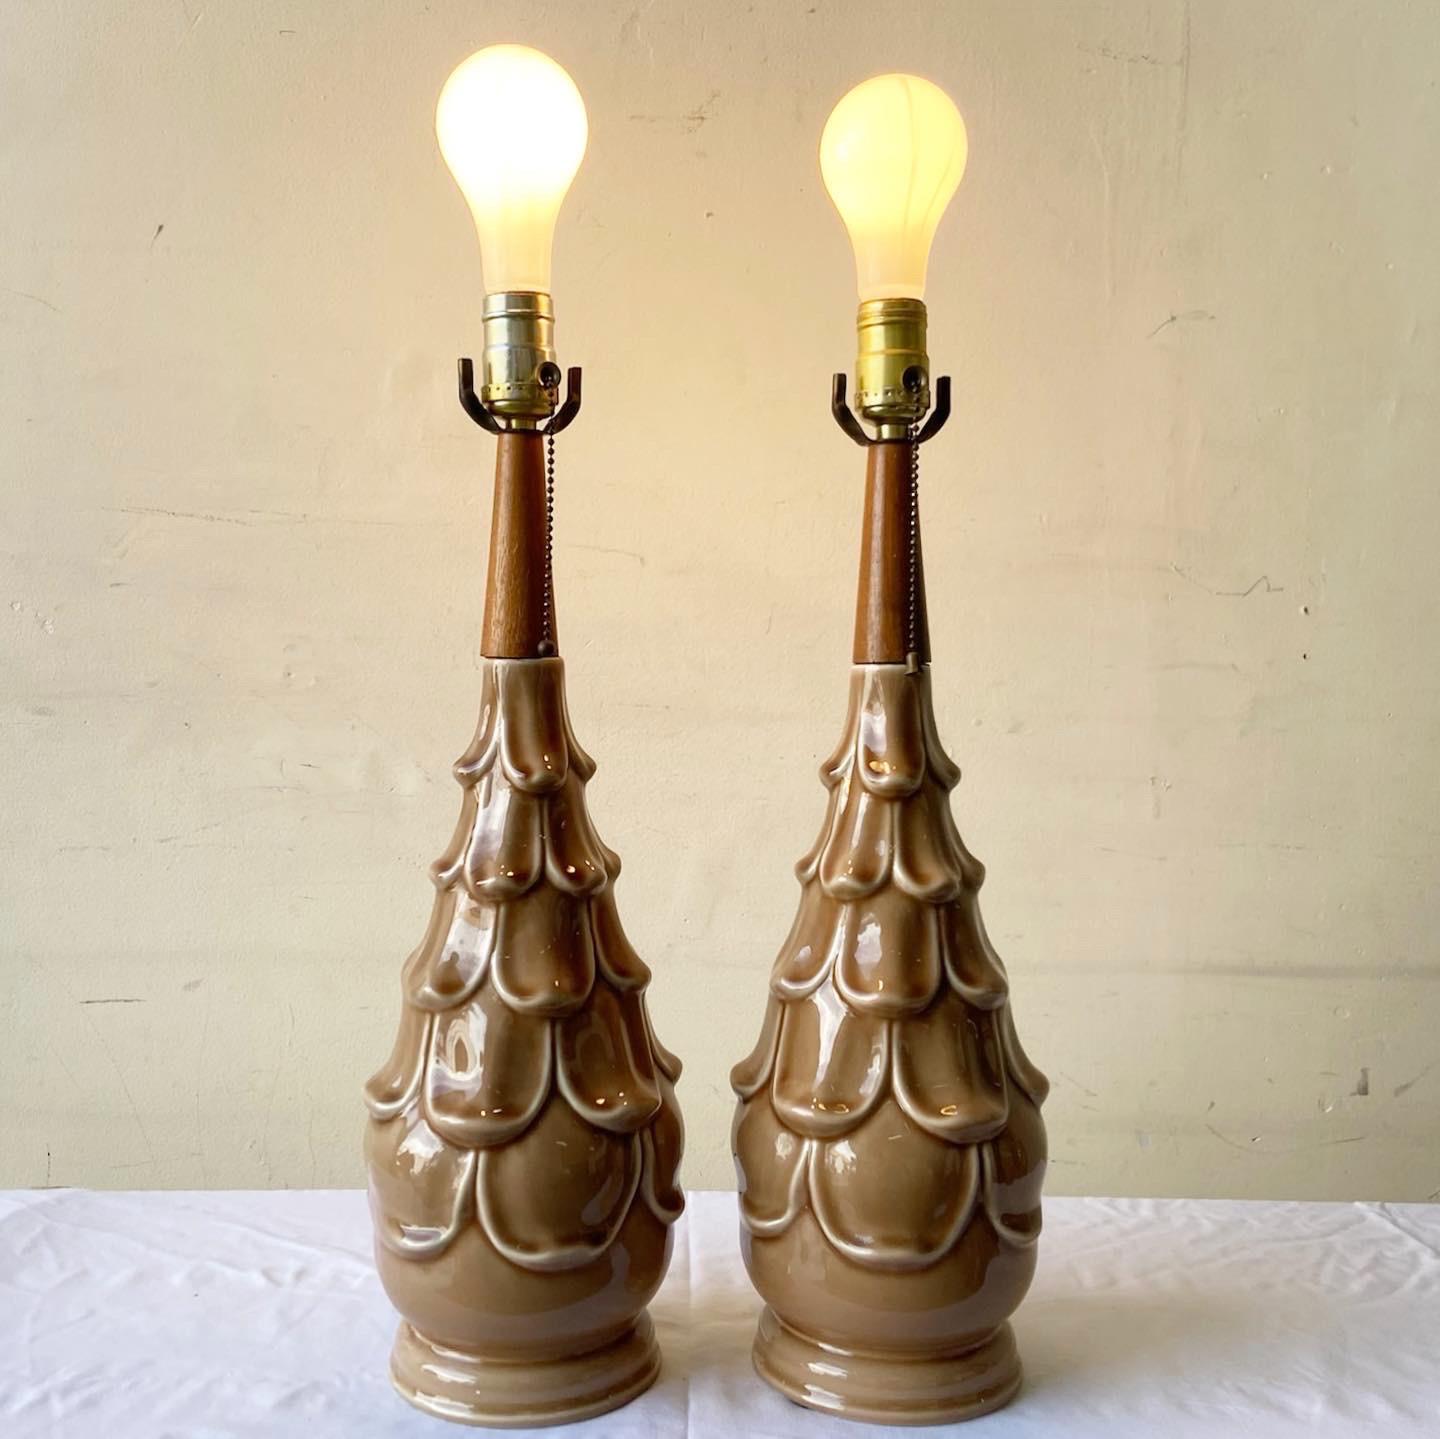 Amazing Mid-Century Modern pair of table lamps. Each feature a wooden neck with a sculpted brown ceramic body.

Additional information:
Material: Ceramic, Sculpting
Color: Brown
Style: Mid-Century Modern
Time Period: 1960s
Place of origin: